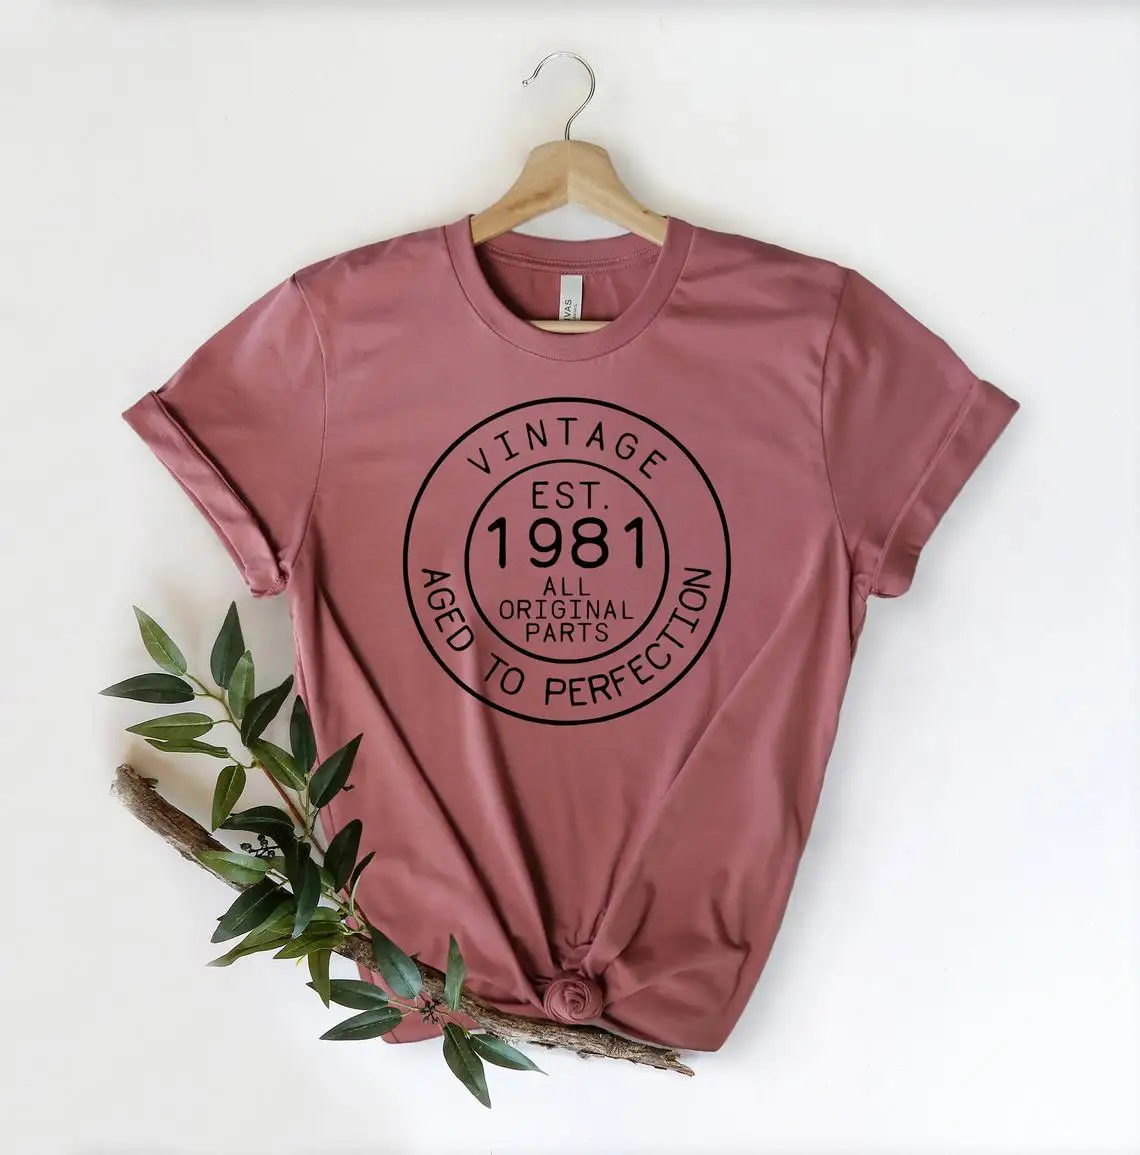 1981 Vintage Birthday Shirt All Original Parts Aged To Perfection 1981 tshirt 40th Birthday Gifts Shirt 40th Birthday Gifts For Men Women